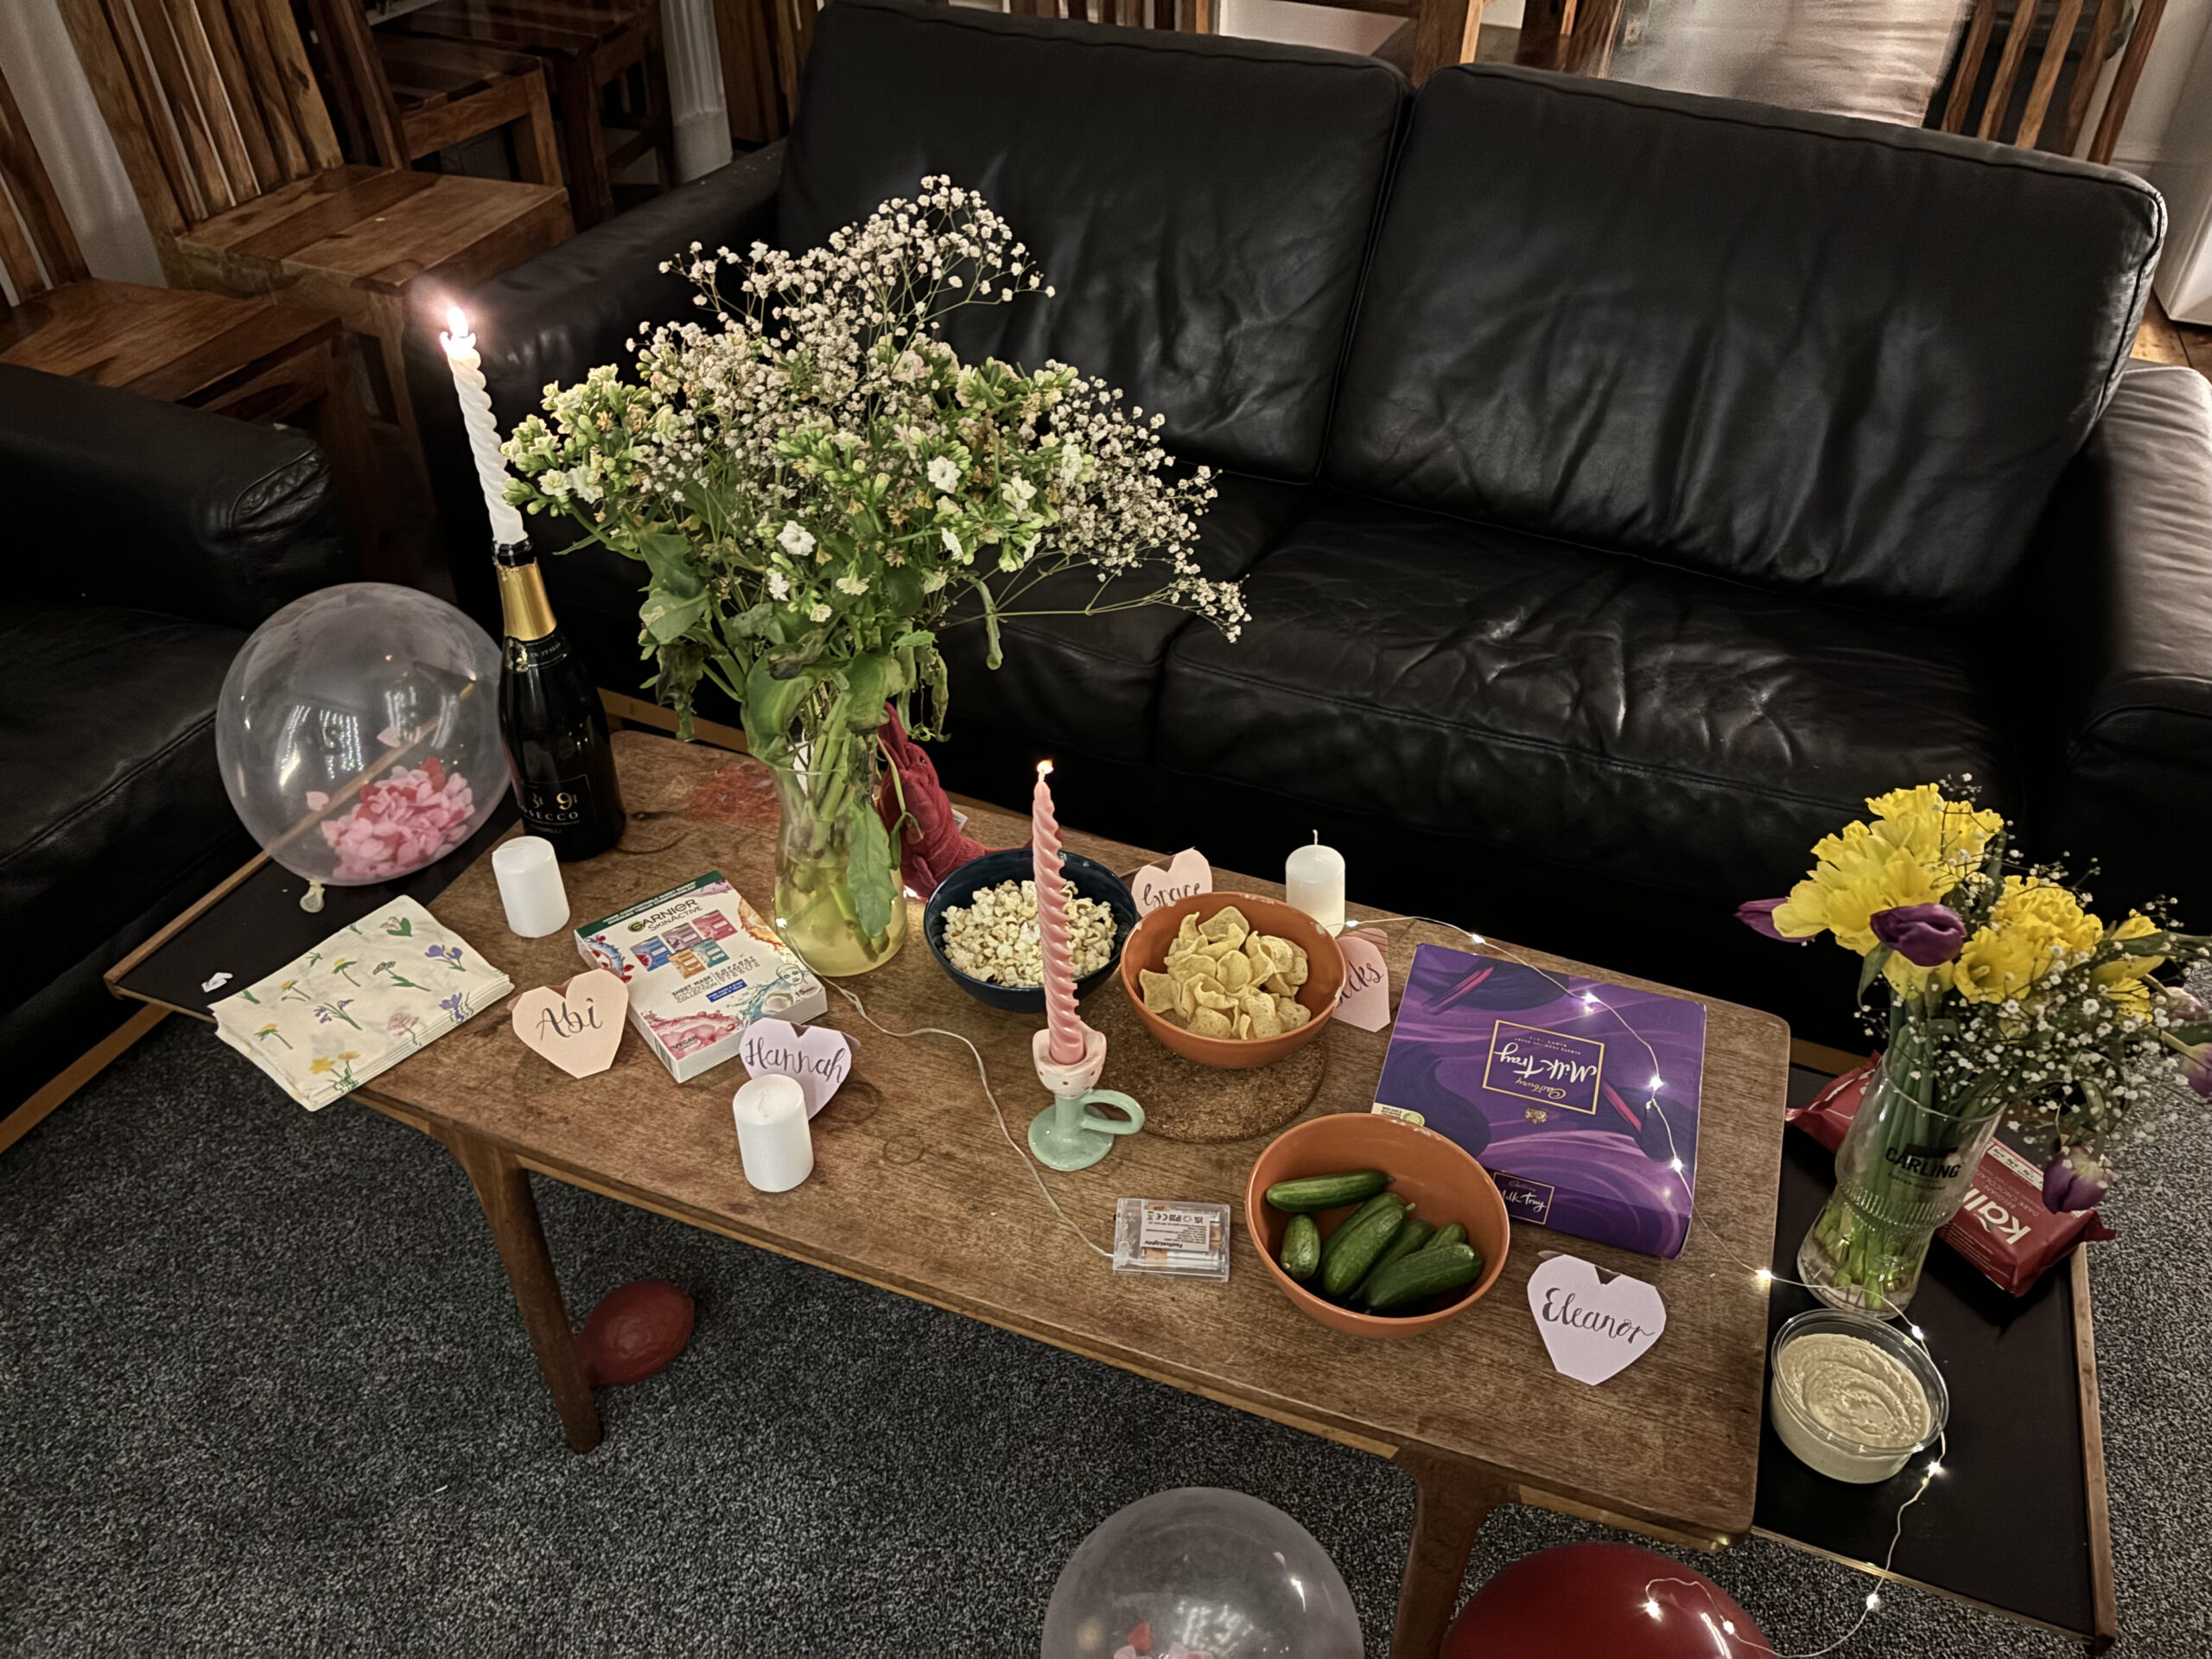 The living room set up for palentine's day